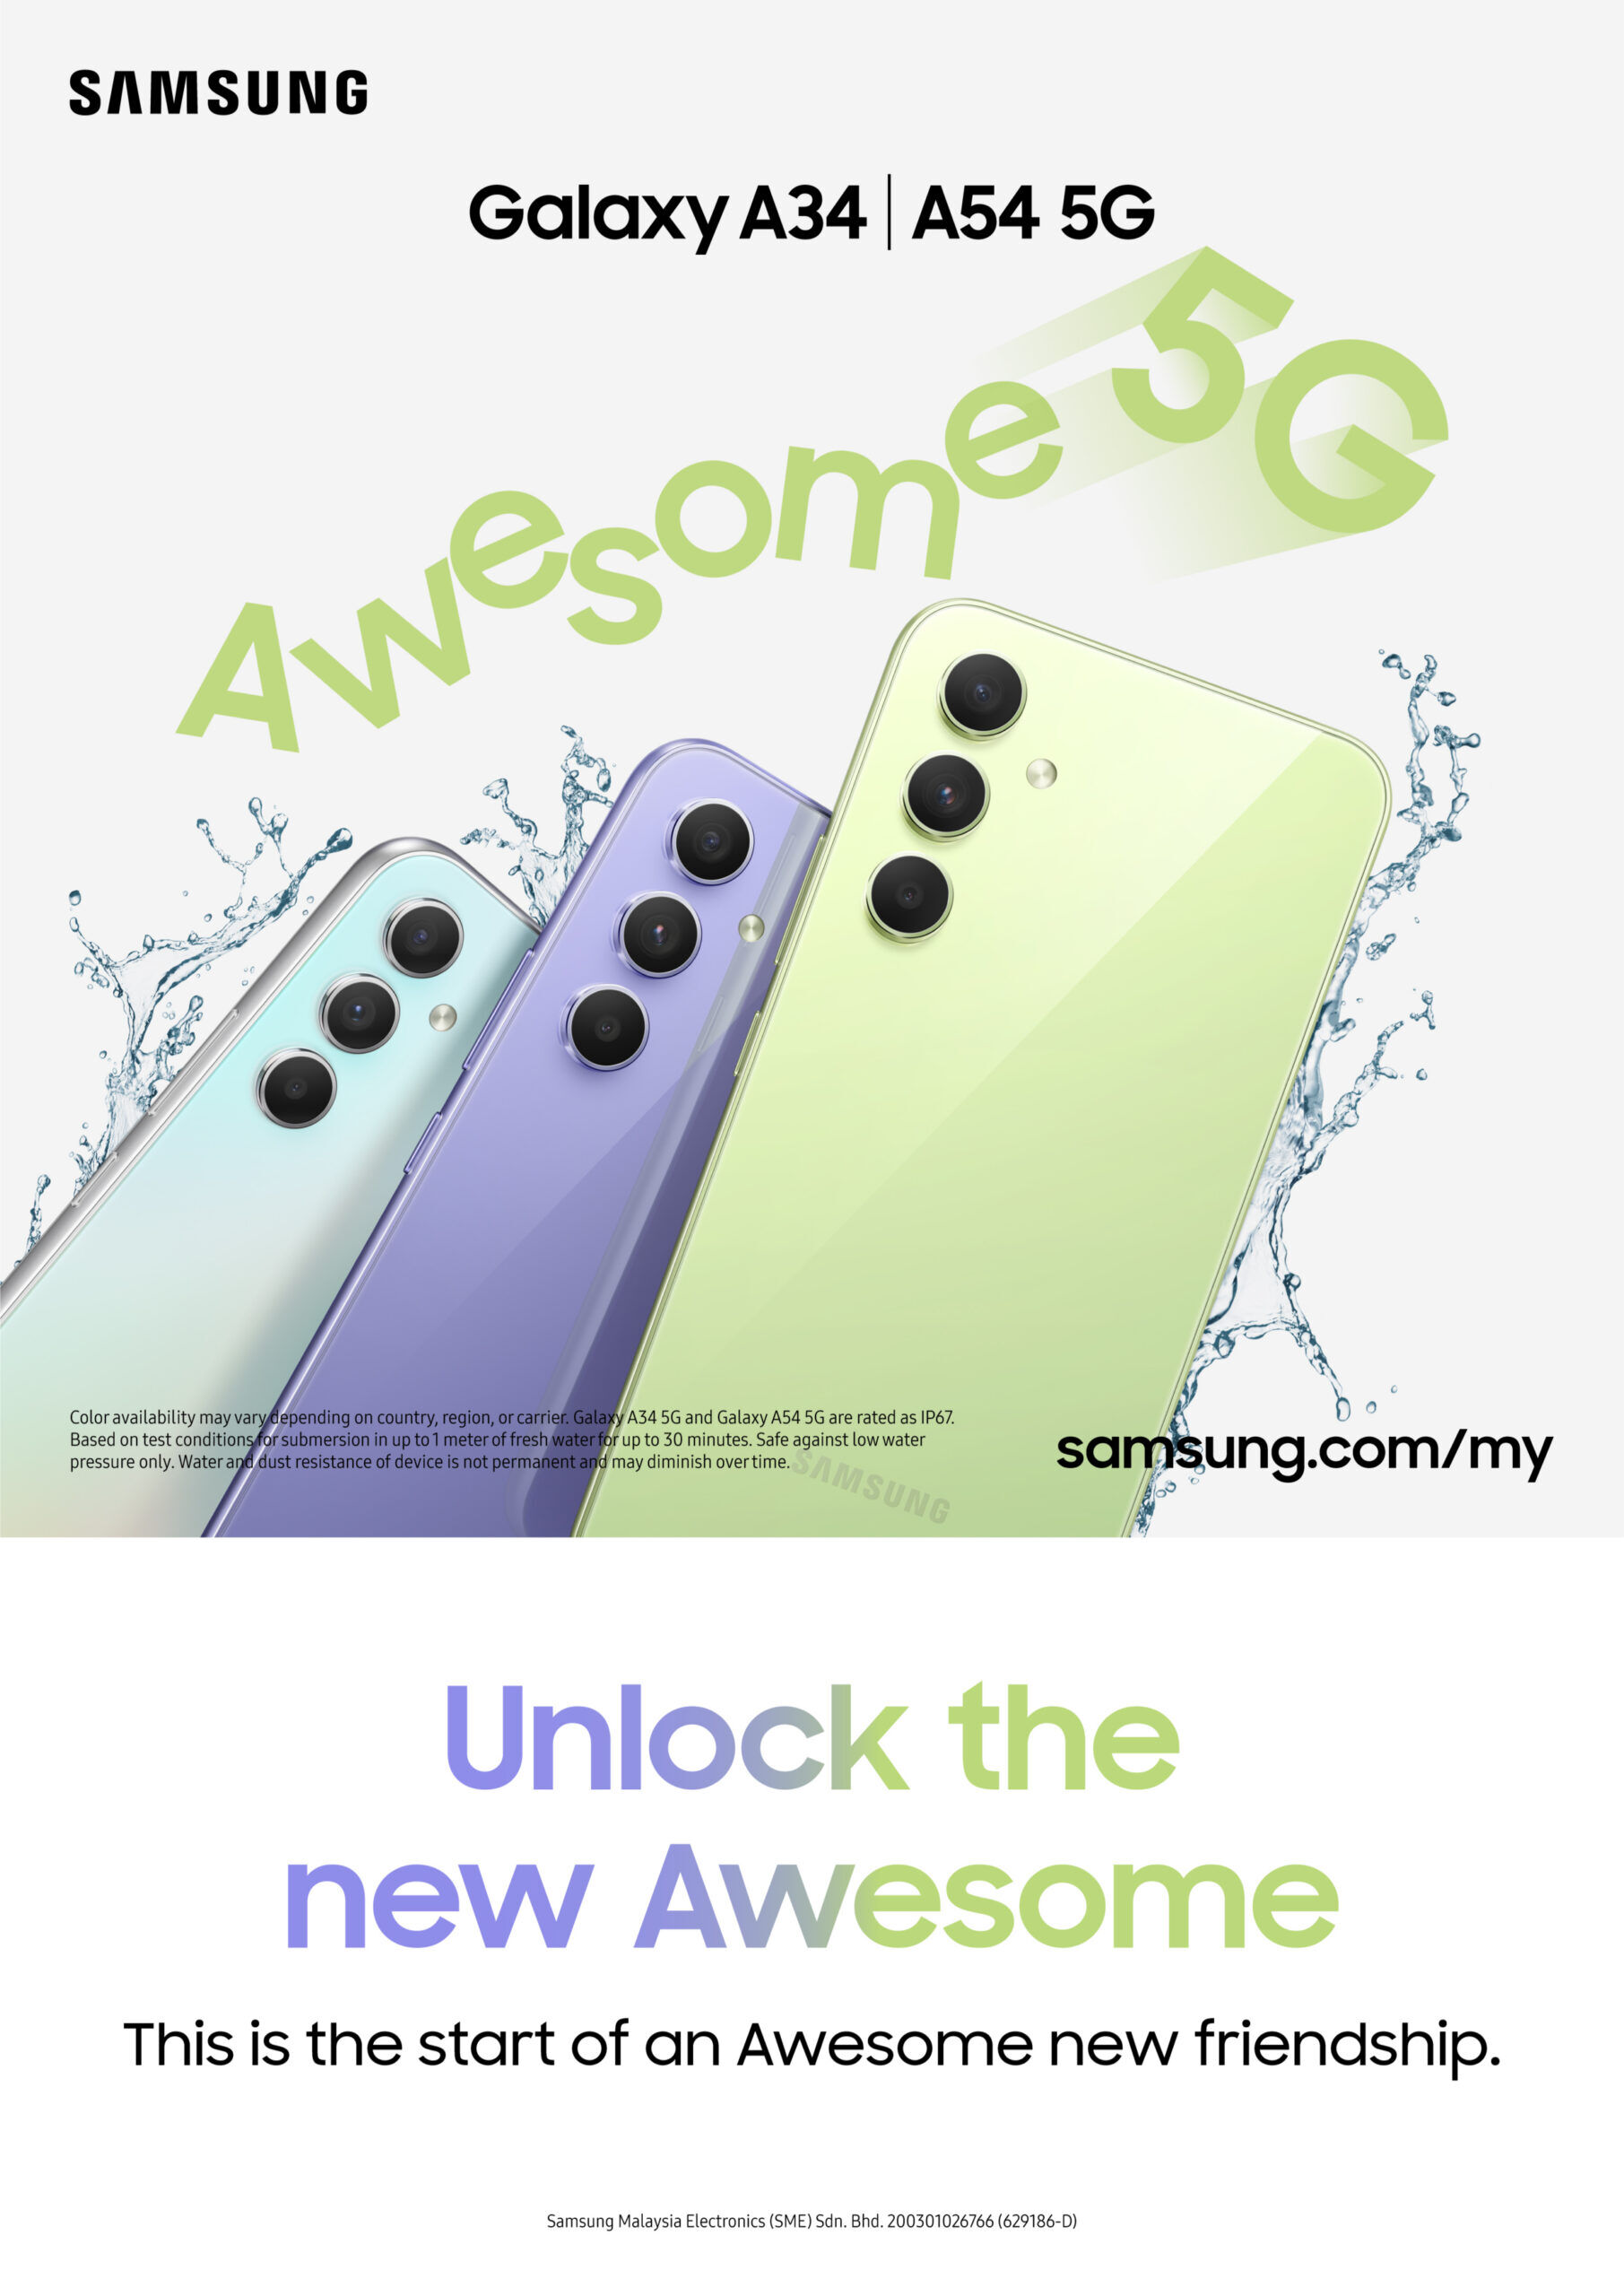 Samsung Introduces Galaxy A54 5G and Galaxy A34 5G, Coming Soon To Malaysia